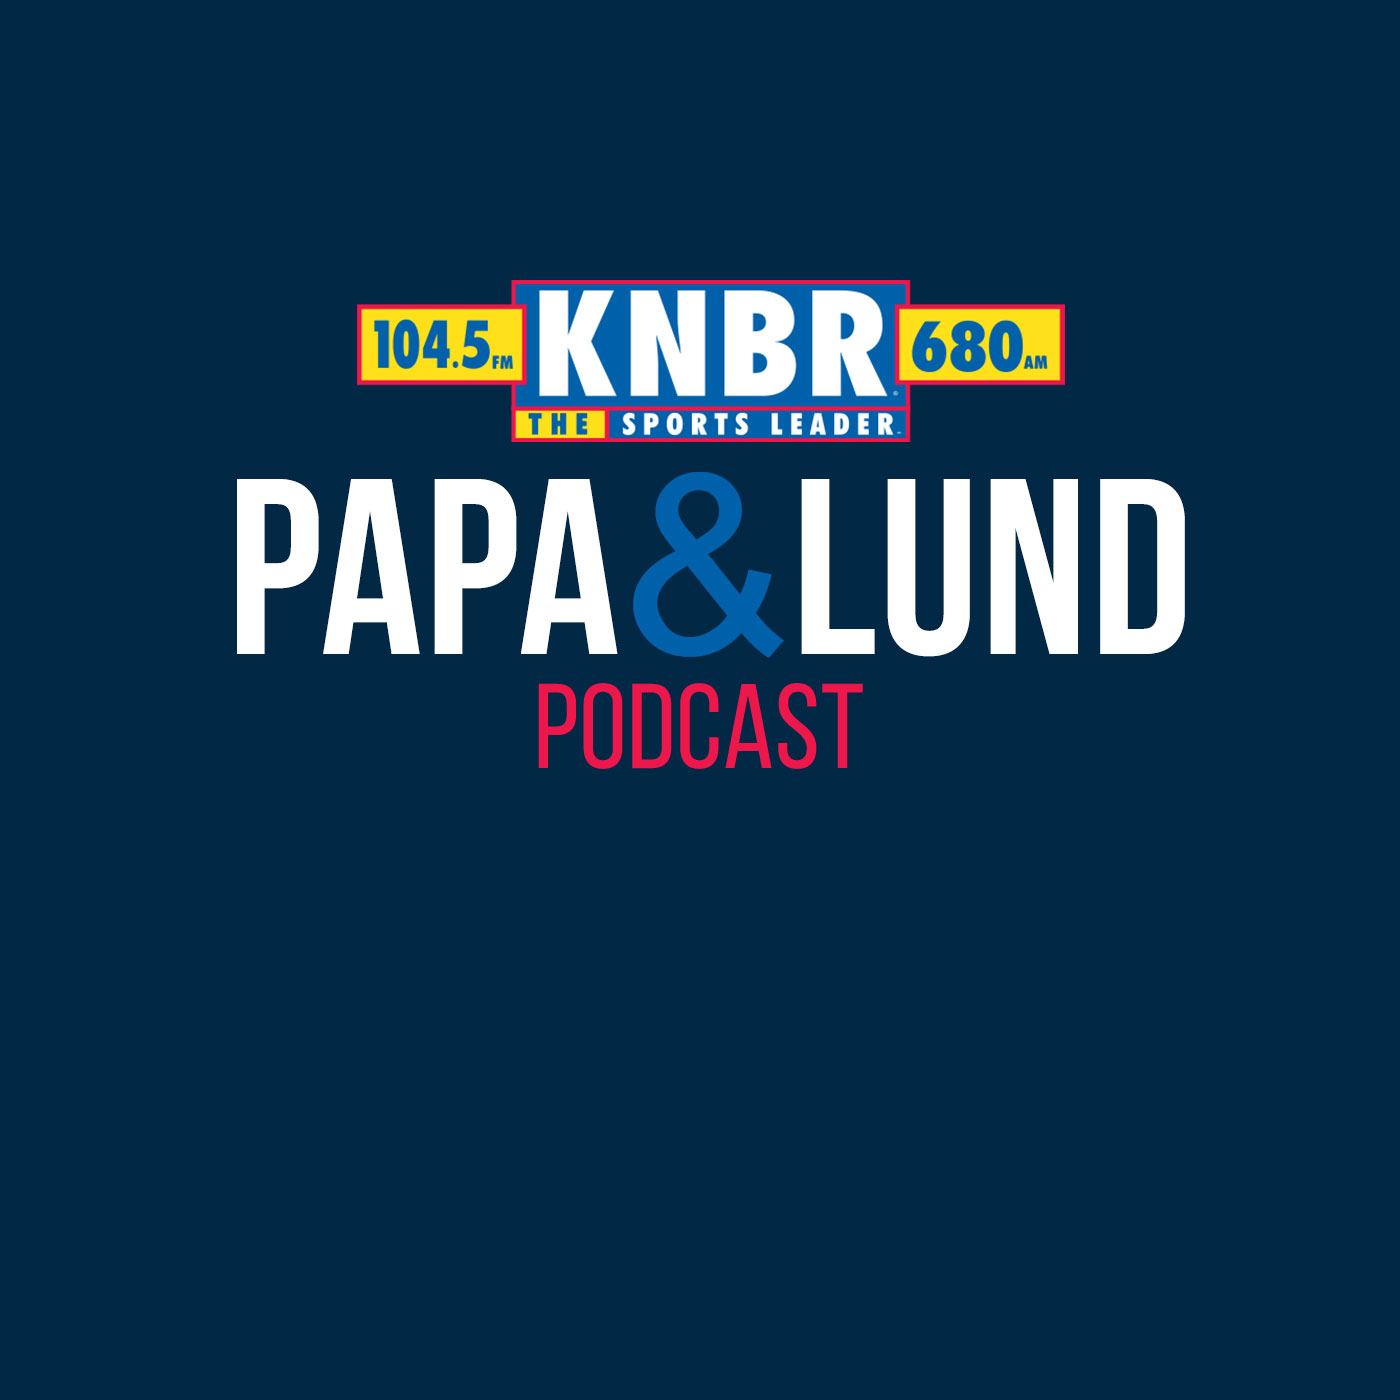 2-8 Legarrette Blount joins Papa & Lund LIVE from Media Row to discuss the running game factor to the Superbowl matchup how it was to play with the Tom Brady and the New England Patriots